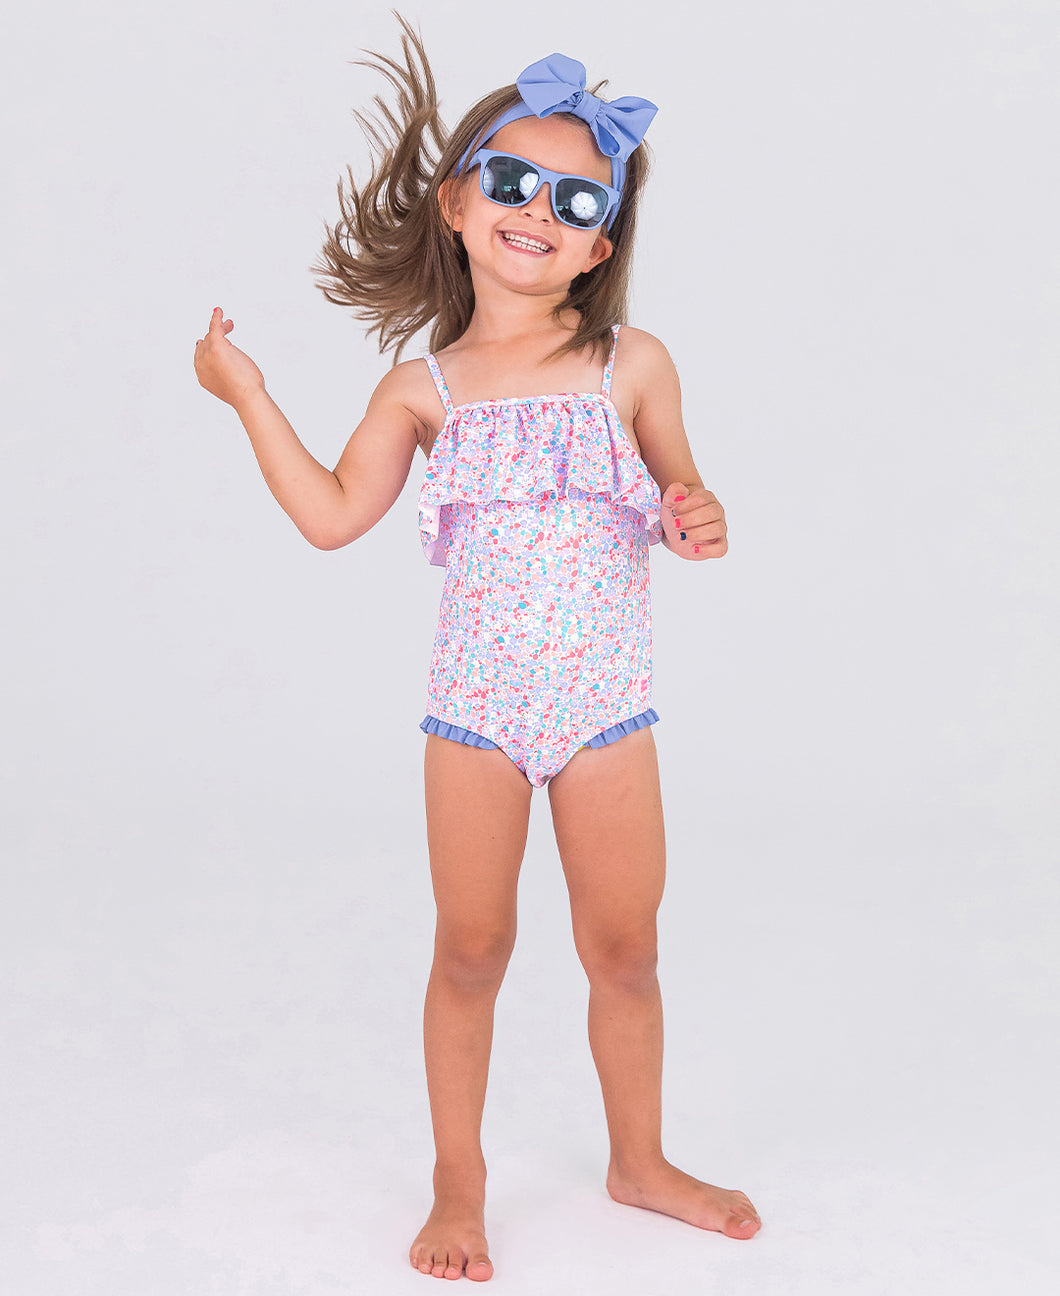 Sparkly Floral Swimsuit w/ Ruffle Accent